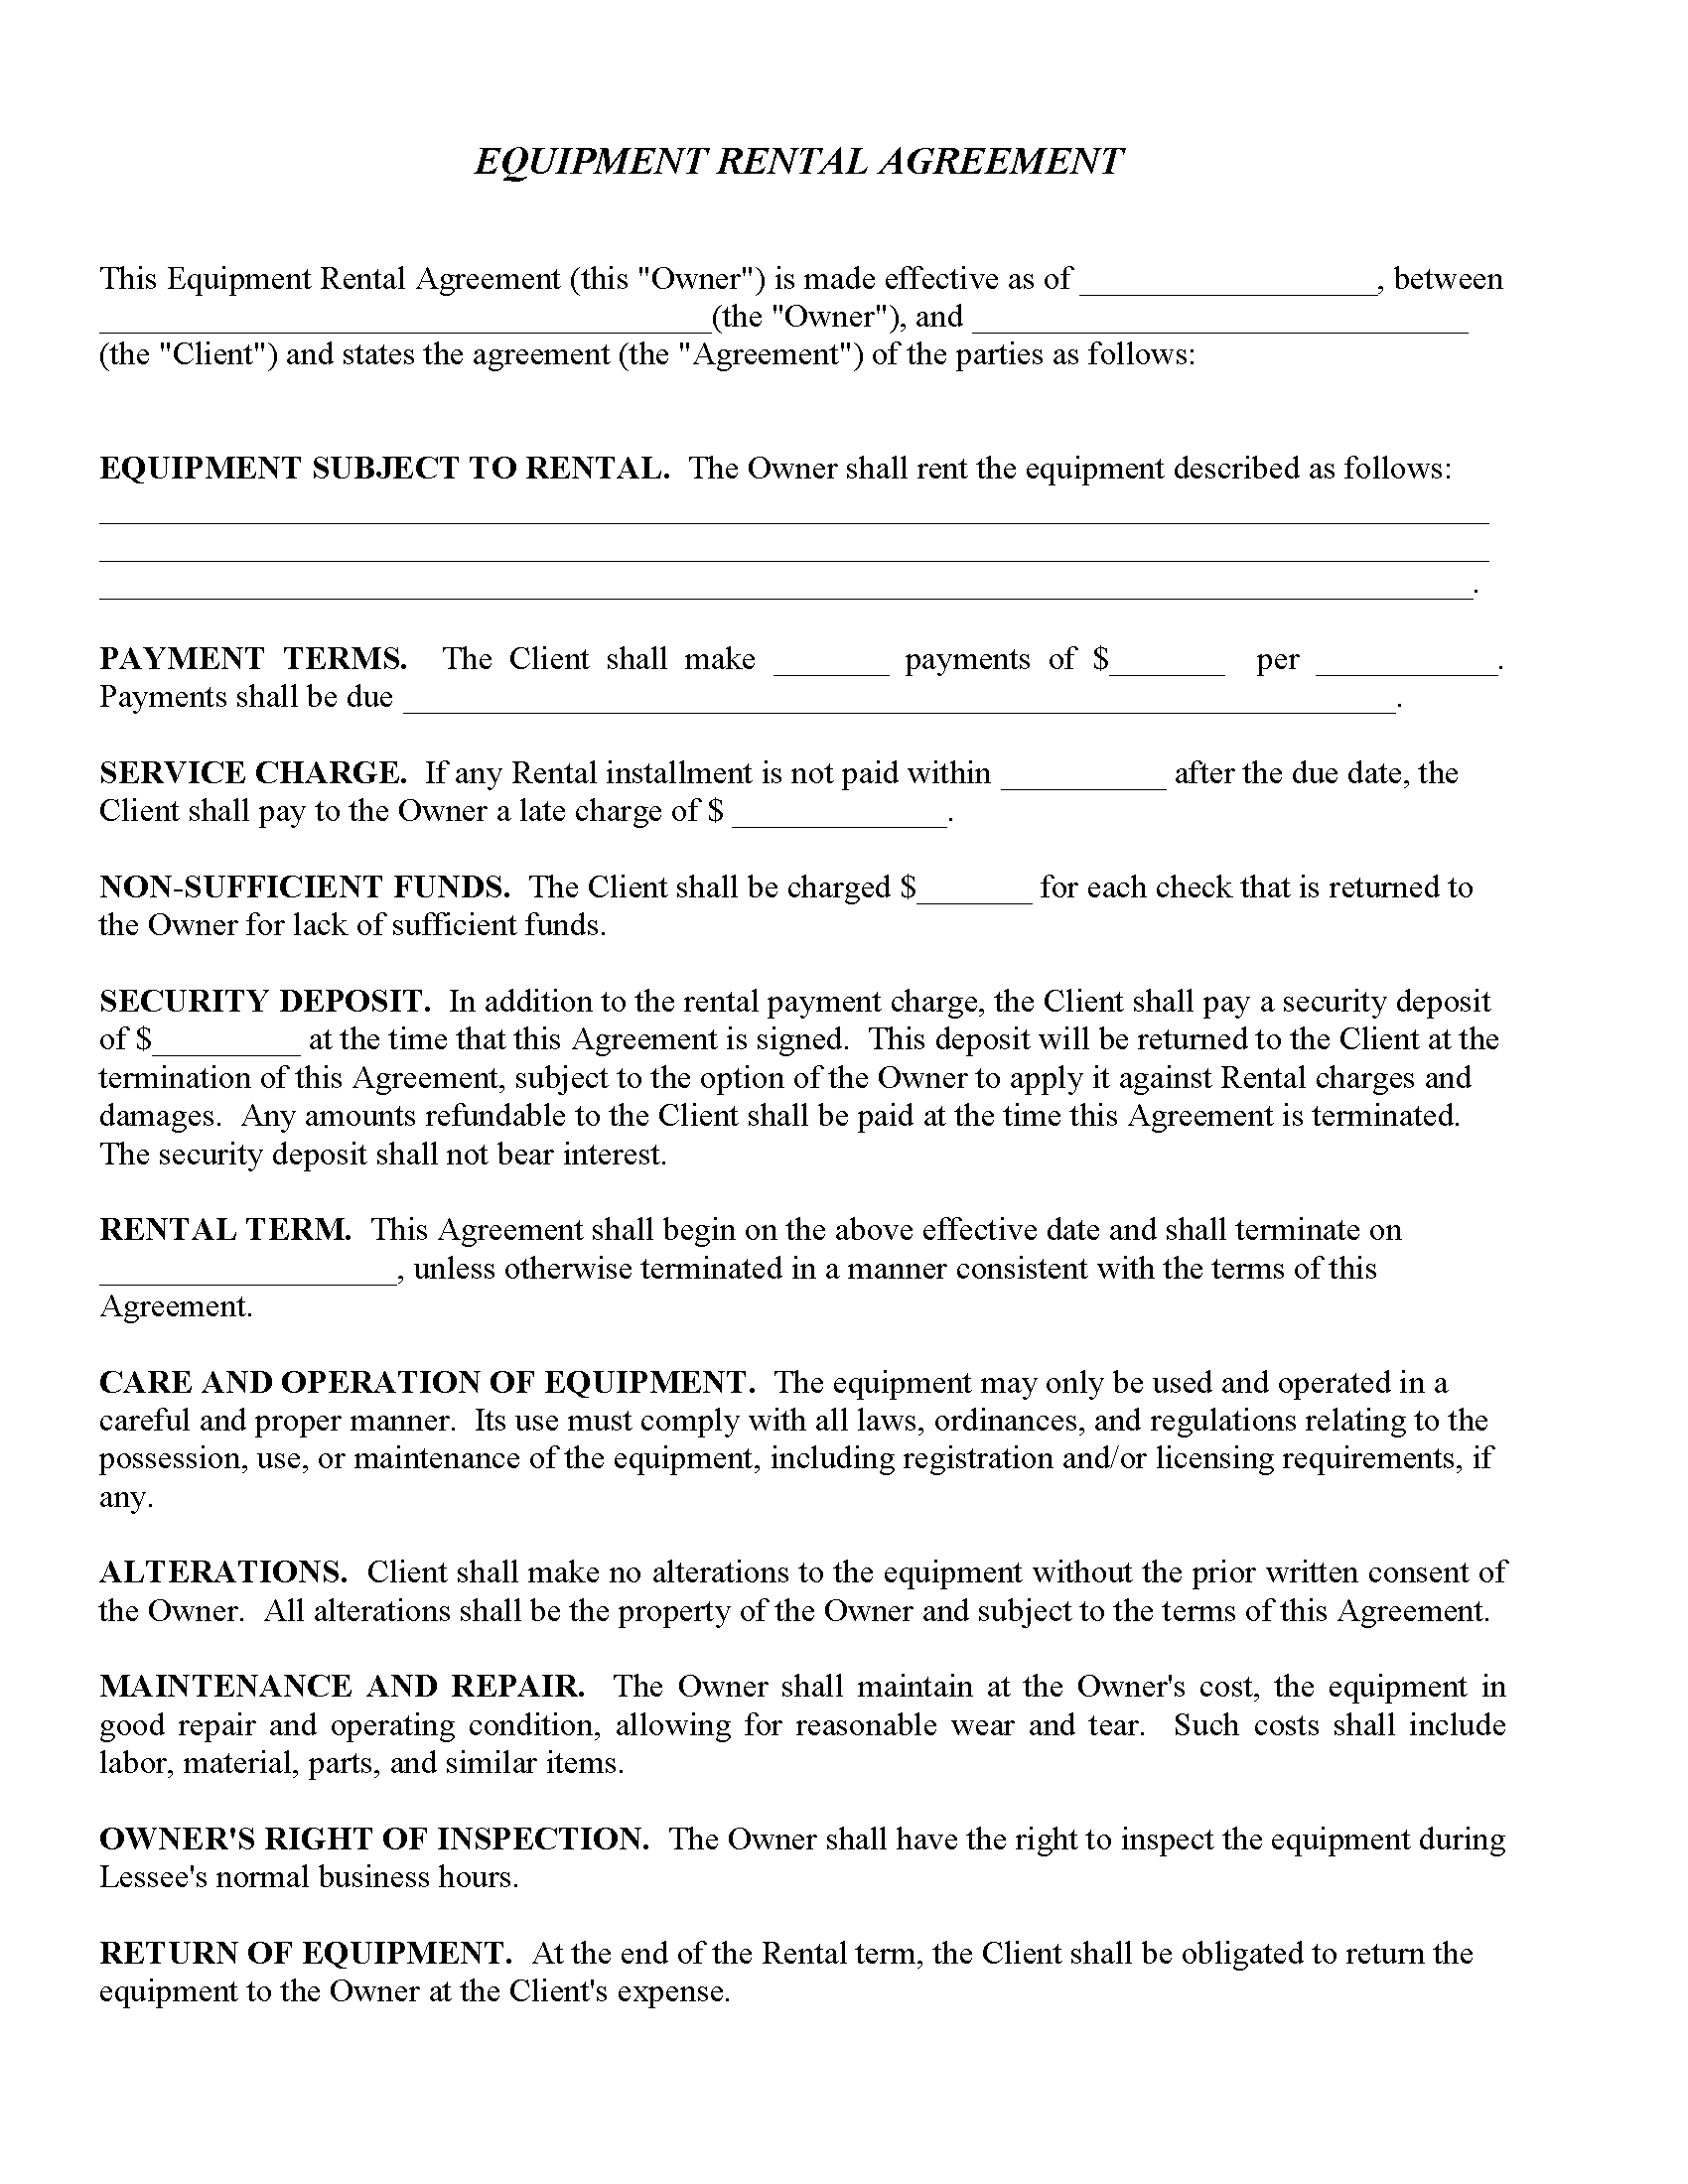 rental lease forms archives page 3 of 3 free printable legal forms